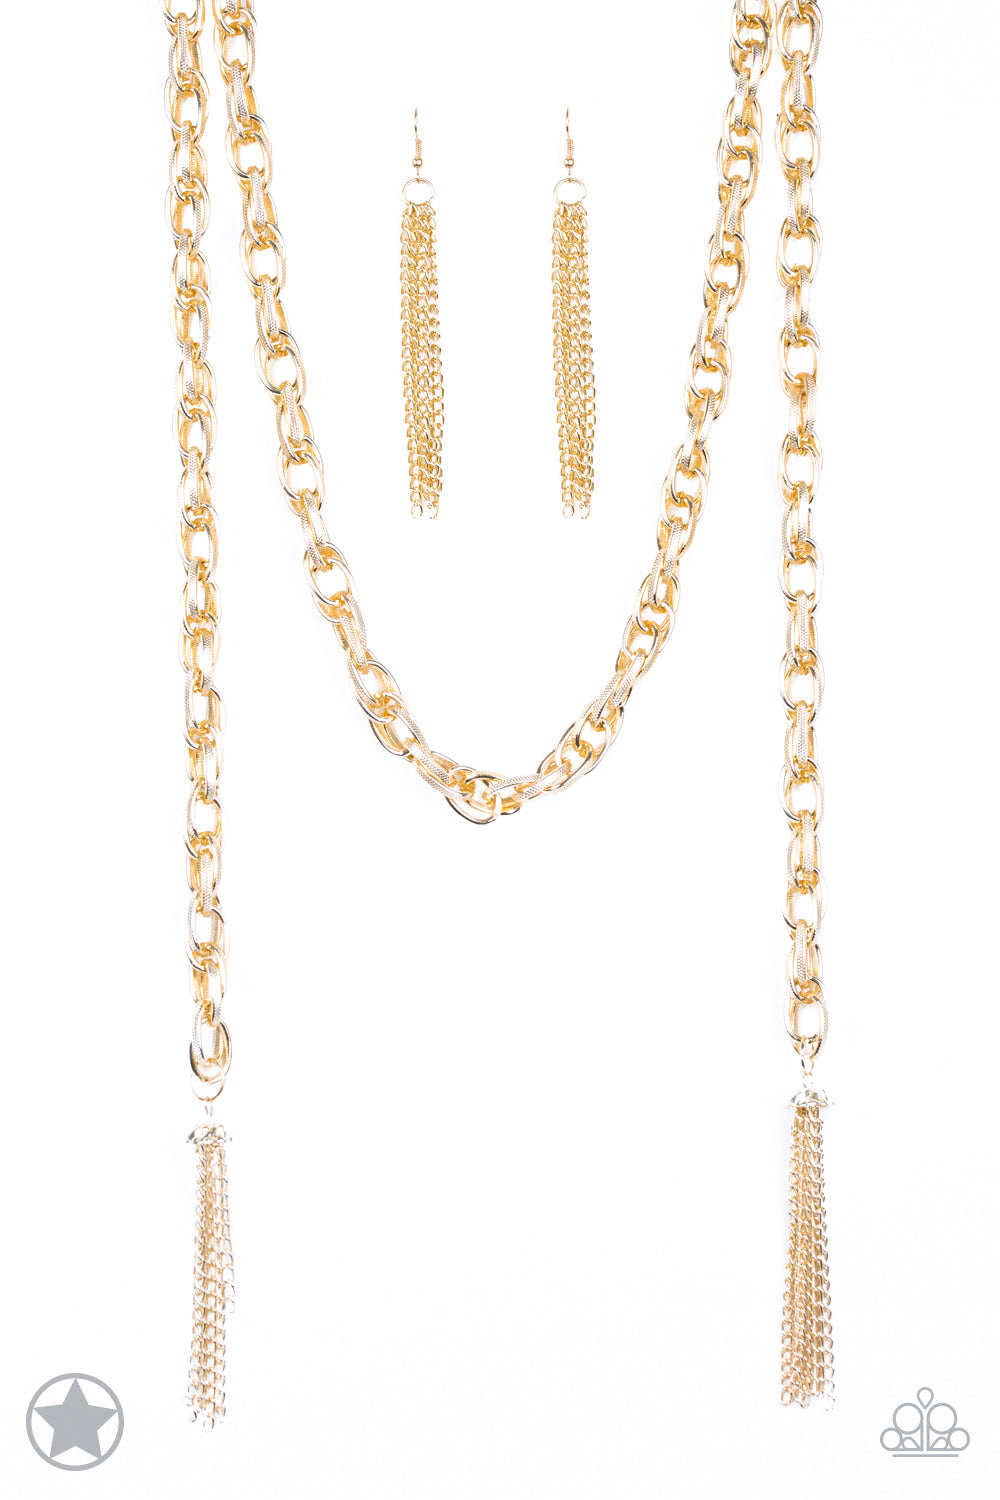 Paparazzi Accessories Scarfed for Attention - Gold Blockbuster Necklaces - Lady T Accessories